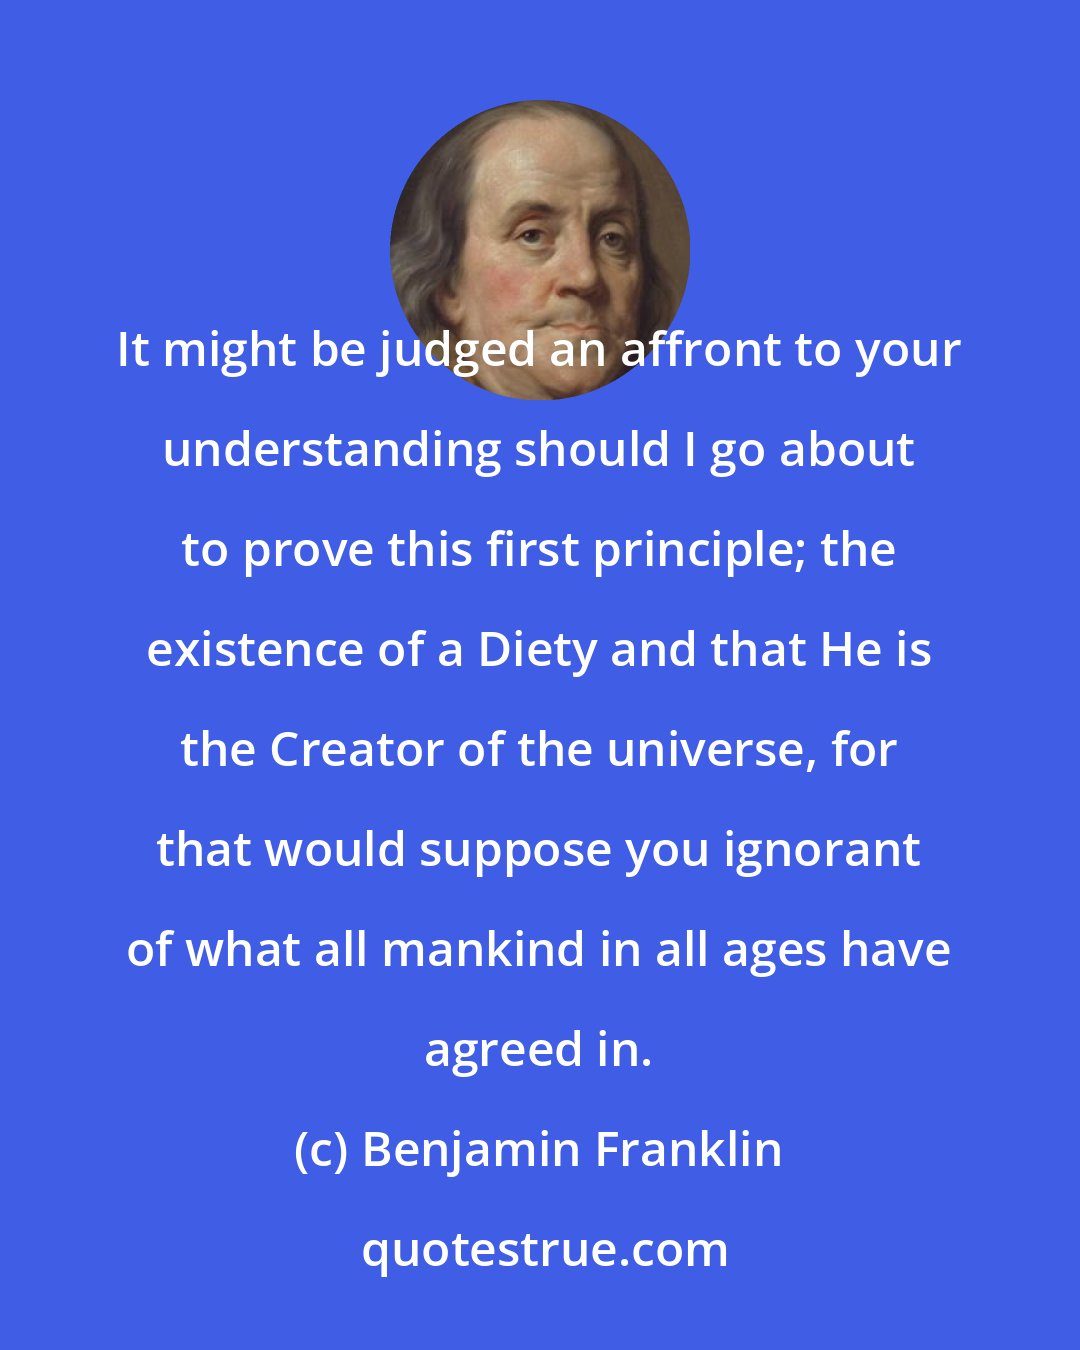 Benjamin Franklin: It might be judged an affront to your understanding should I go about to prove this first principle; the existence of a Diety and that He is the Creator of the universe, for that would suppose you ignorant of what all mankind in all ages have agreed in.